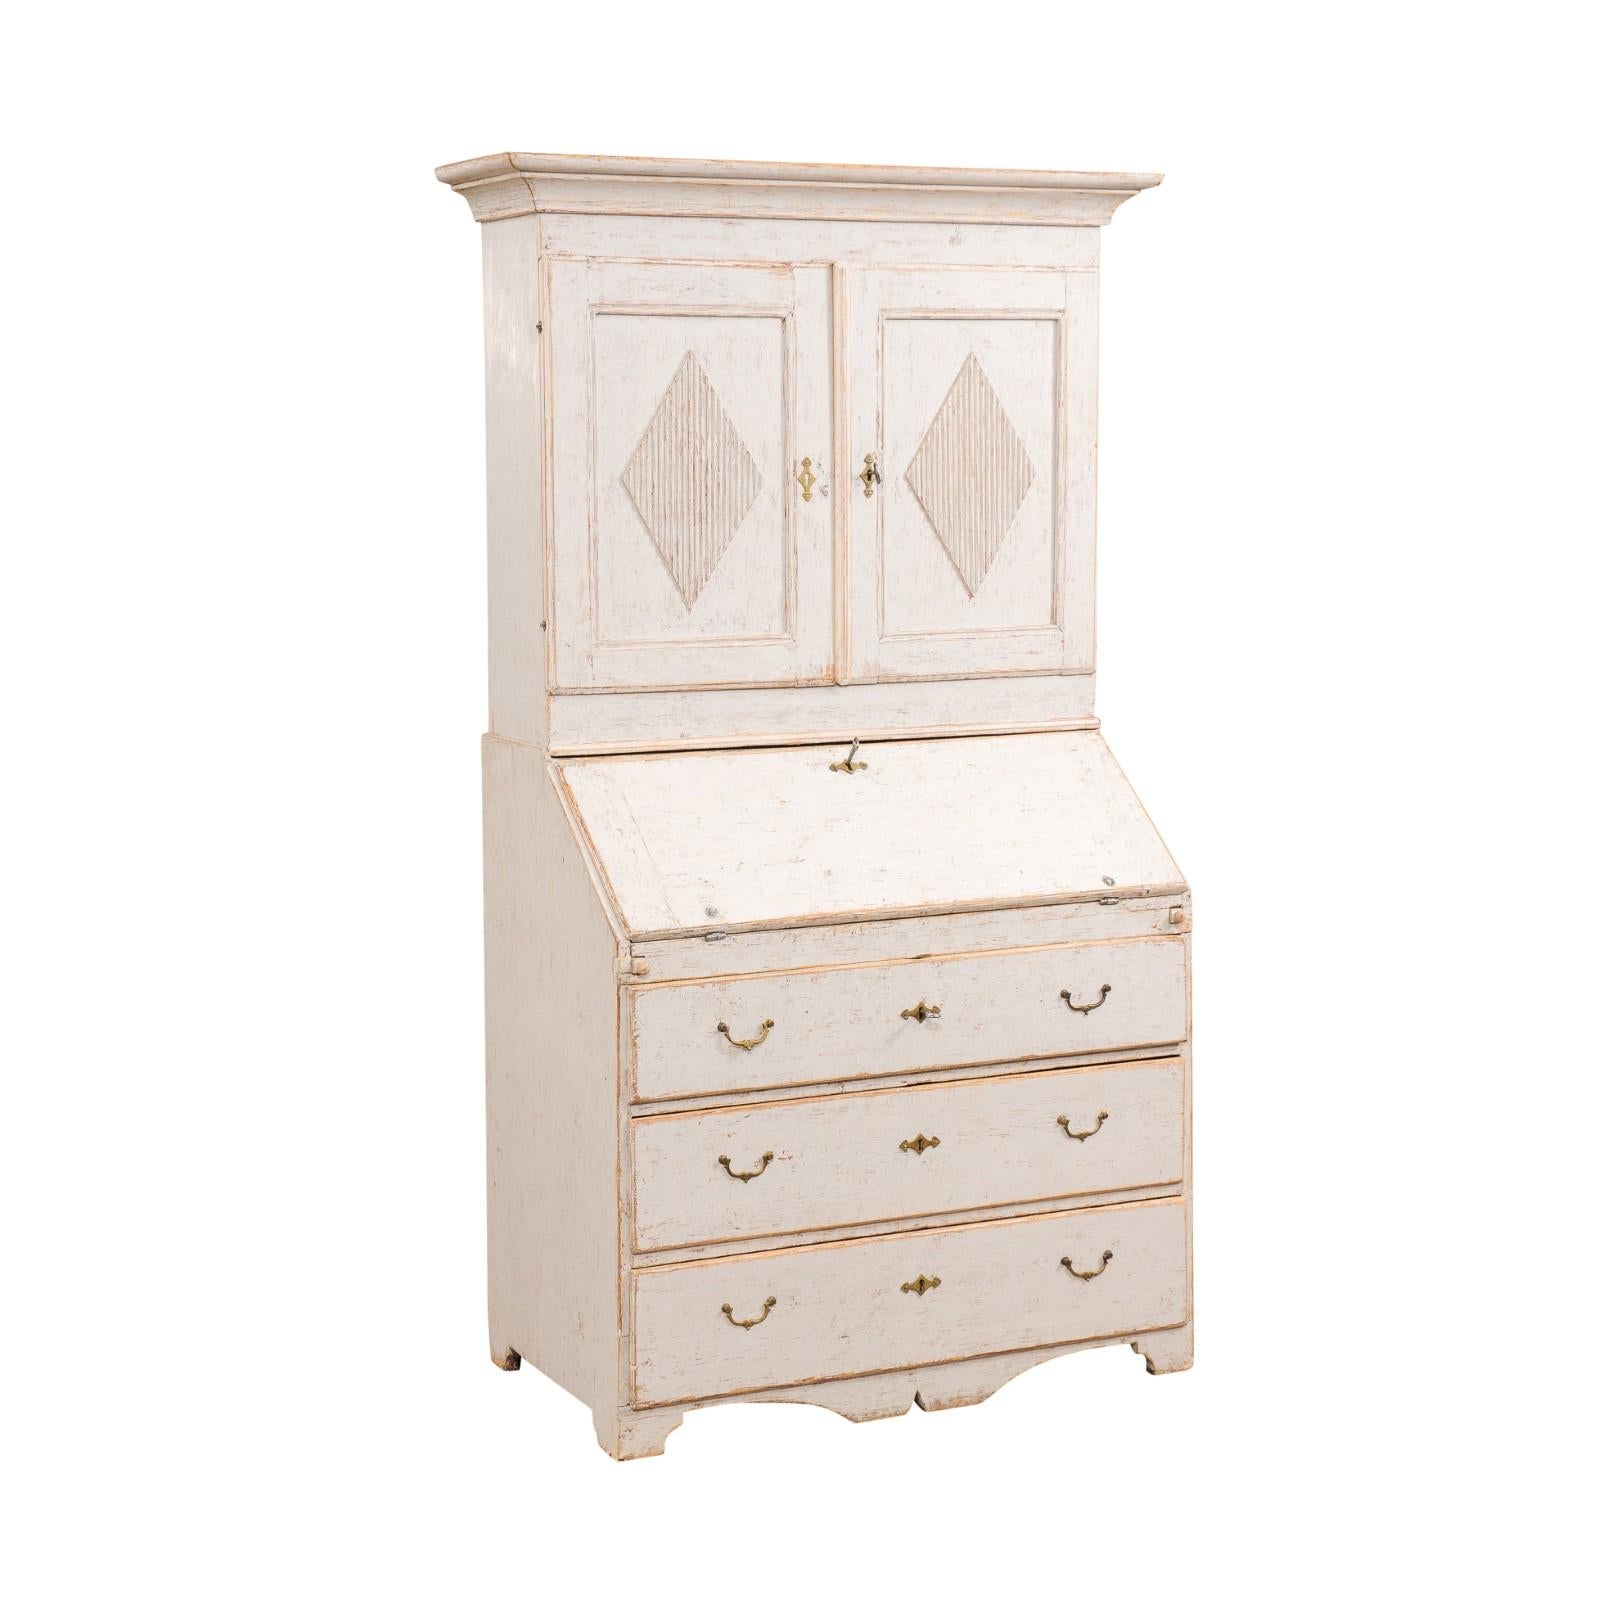 A Swedish Late Gustavian period two-part painted wood secretary from the early 19th century, with two doors, slant-front desk, three drawers, diamond motifs, bracket feet and nicely weathered patina. Created in Sweden at the end of the Gustavian